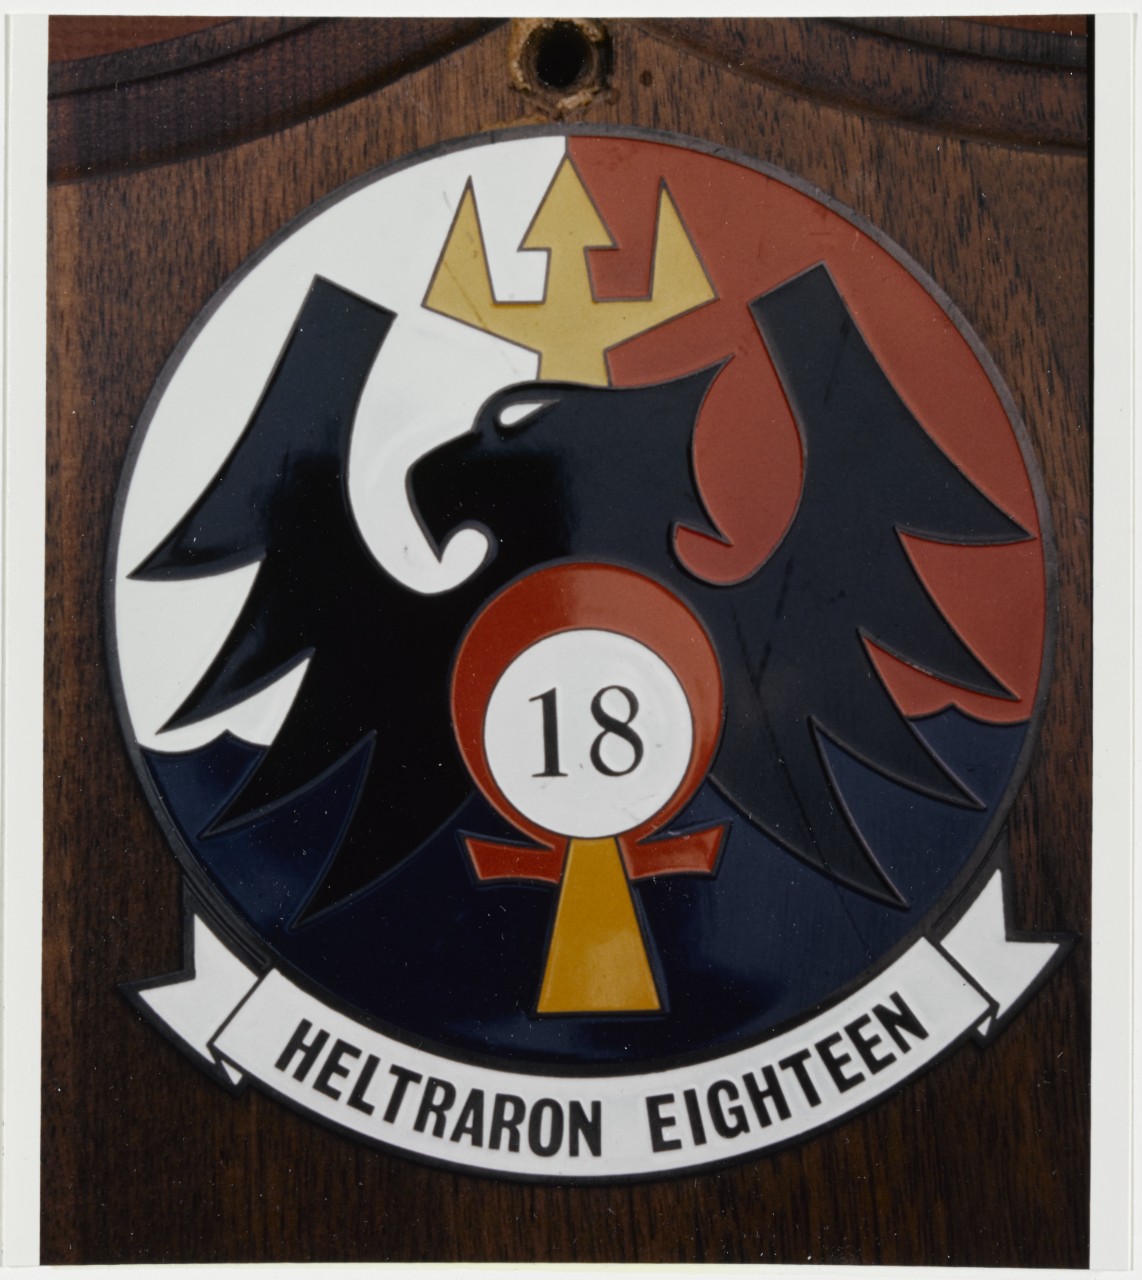 Insignia: Helicopter Training Squadron 18. Heltraron Eighteen